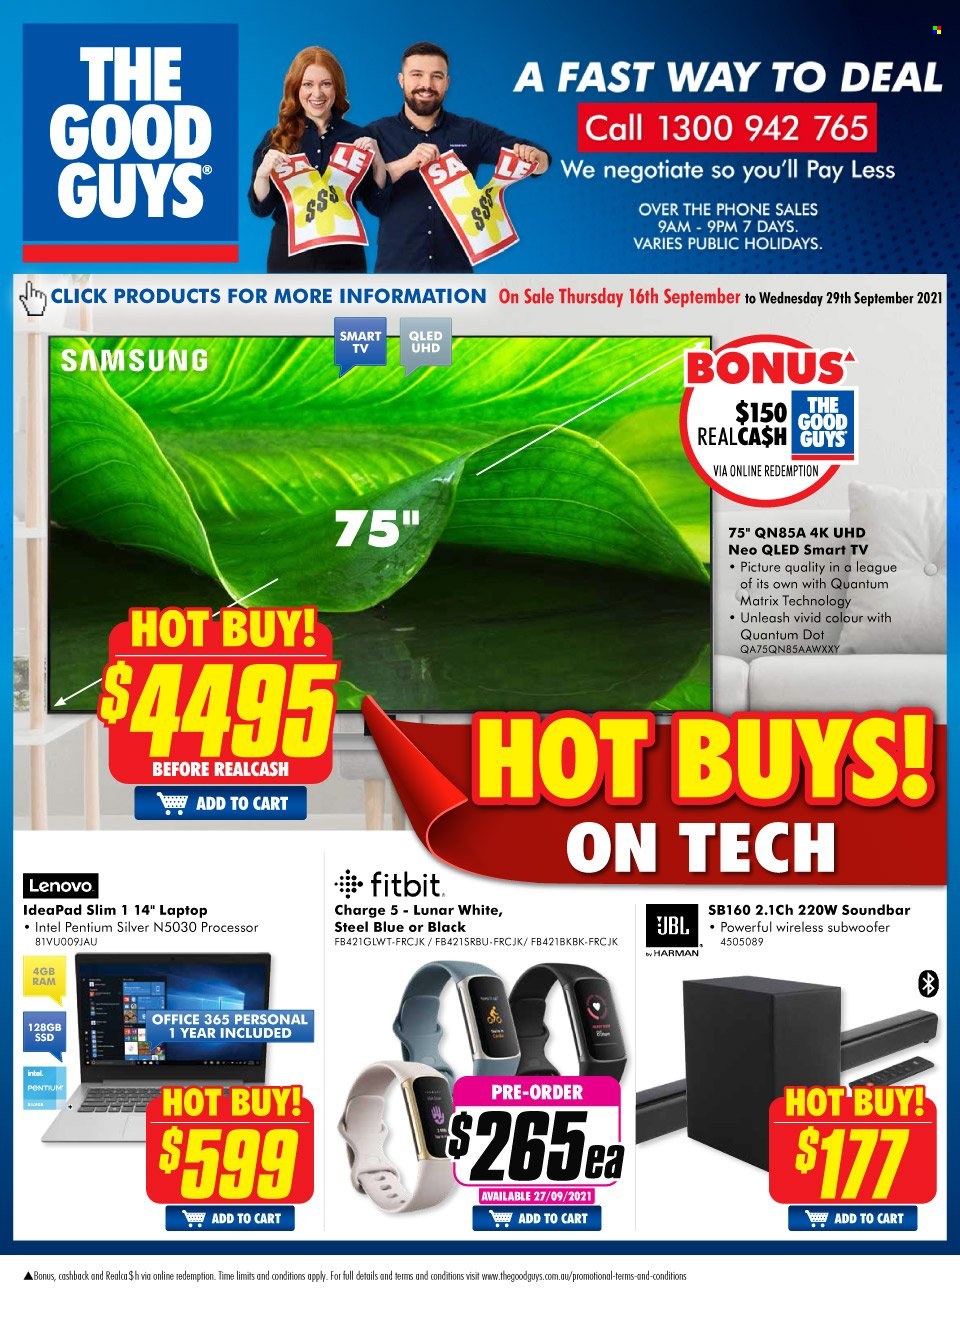 thumbnail - The Good Guys Catalogue - 16 Sep 2021 - 29 Sep 2021 - Sales products - Intel, Office 365, Lenovo, Samsung, Fitbit, laptop, smart tv, TV, subwoofer, wireless subwoofer, JBL, sound bar. Page 1.